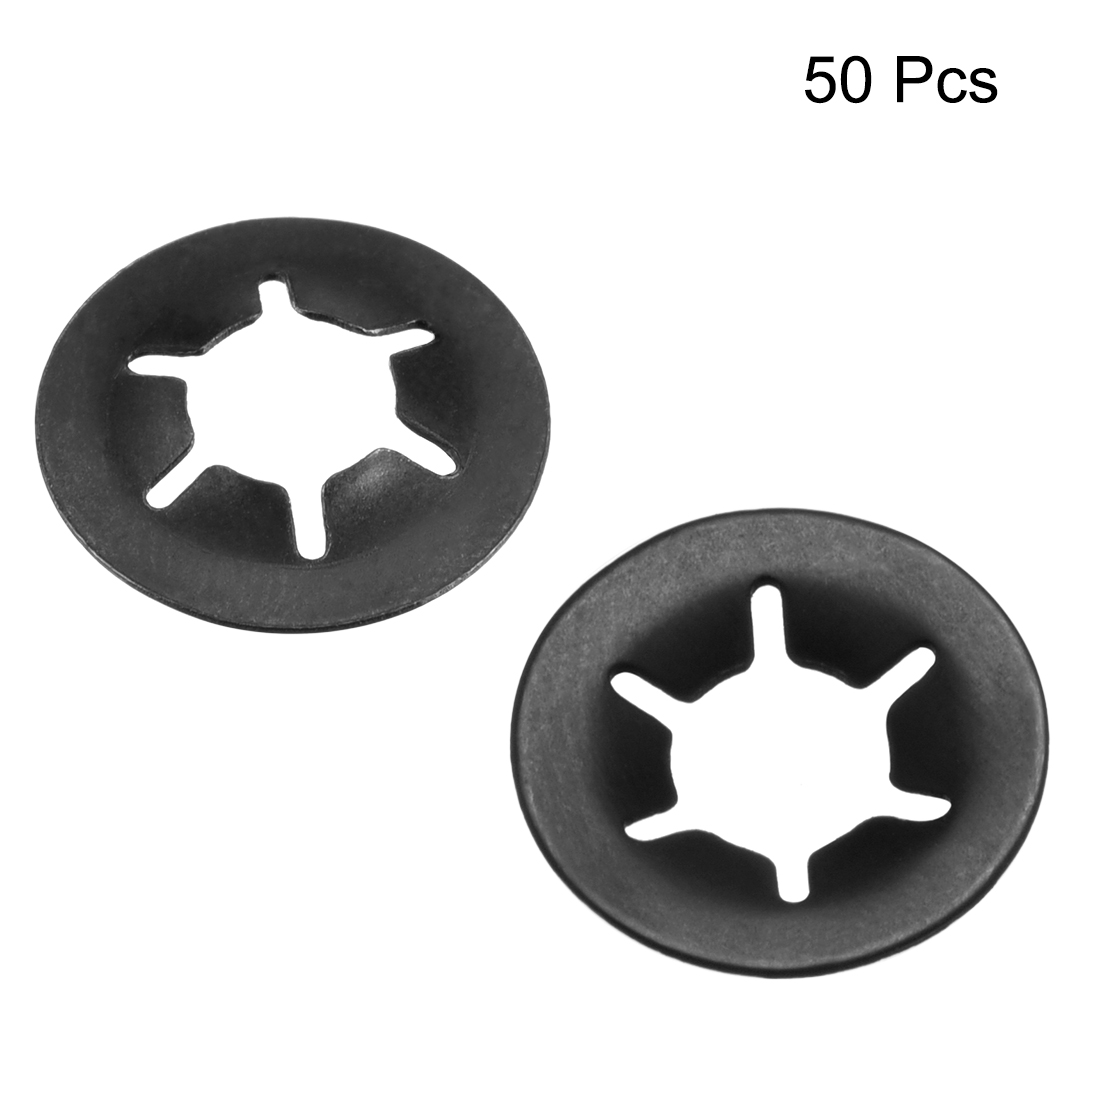 Assorted Genuine Starlock Washers  80 Piece 20 of each 2mm,3mm,4mm,5mm 